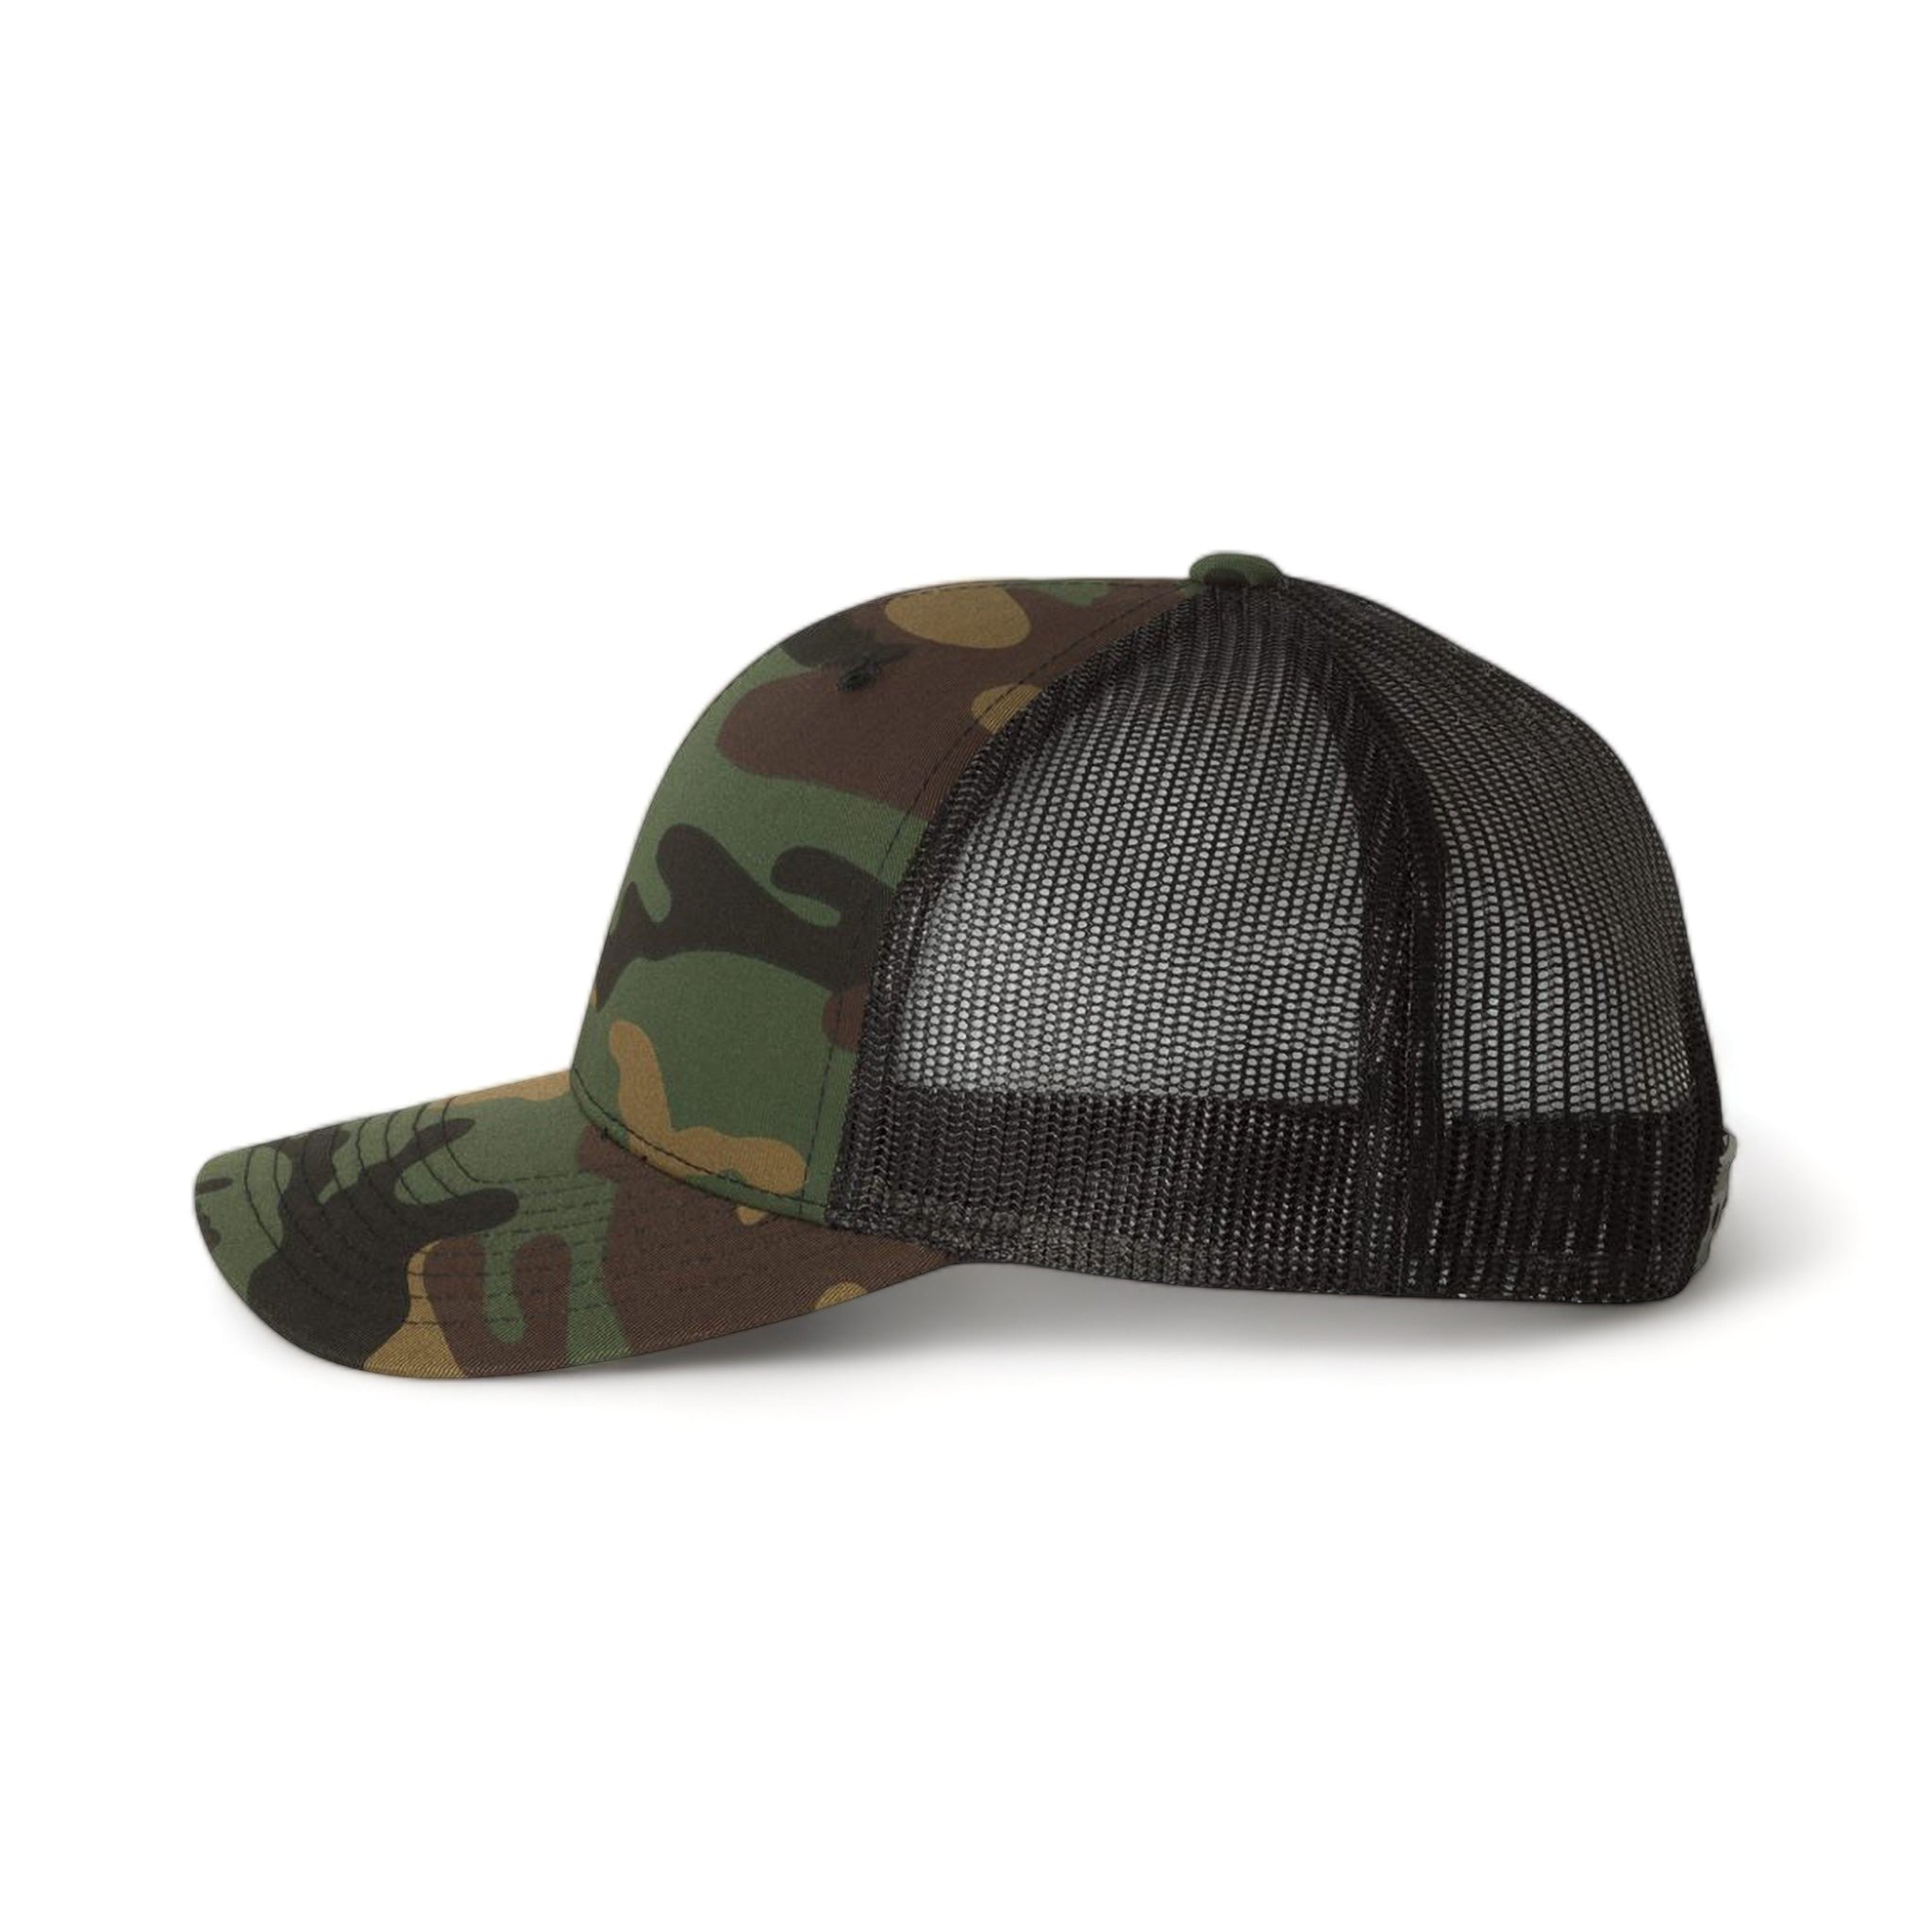 Side view of YP Classics 6606 custom hat in green camo and black